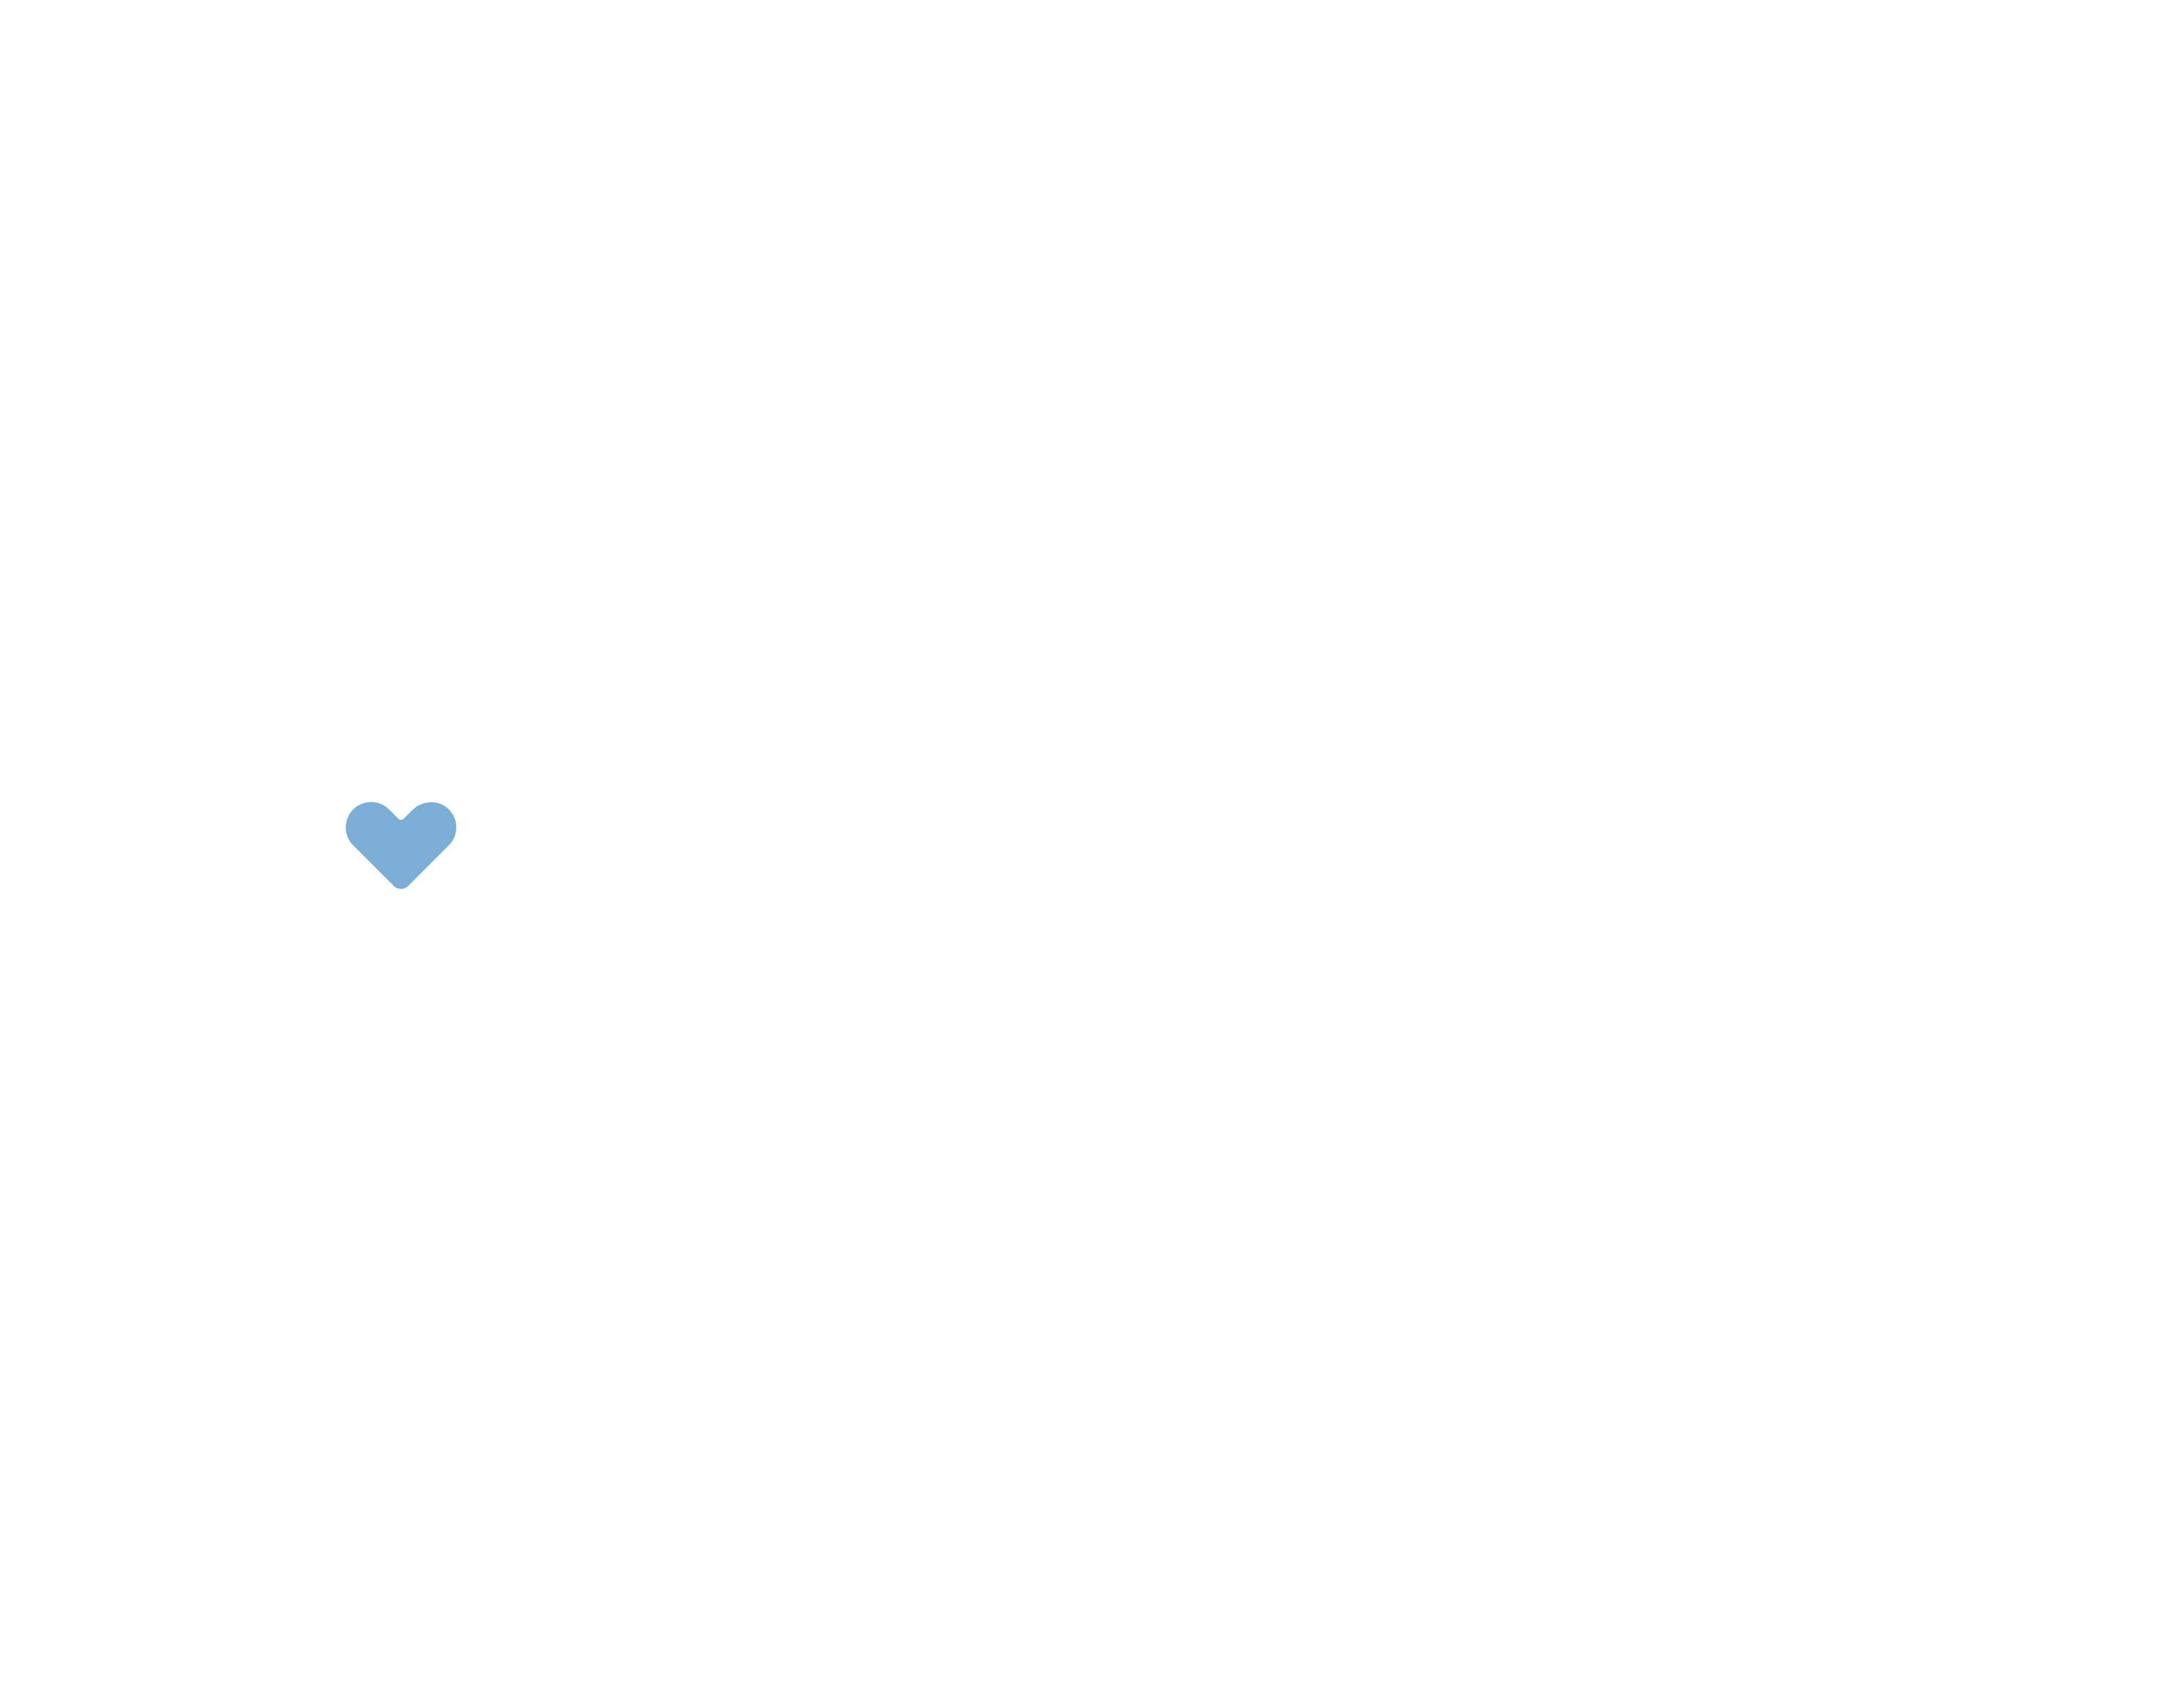 Quilted Northern logo.